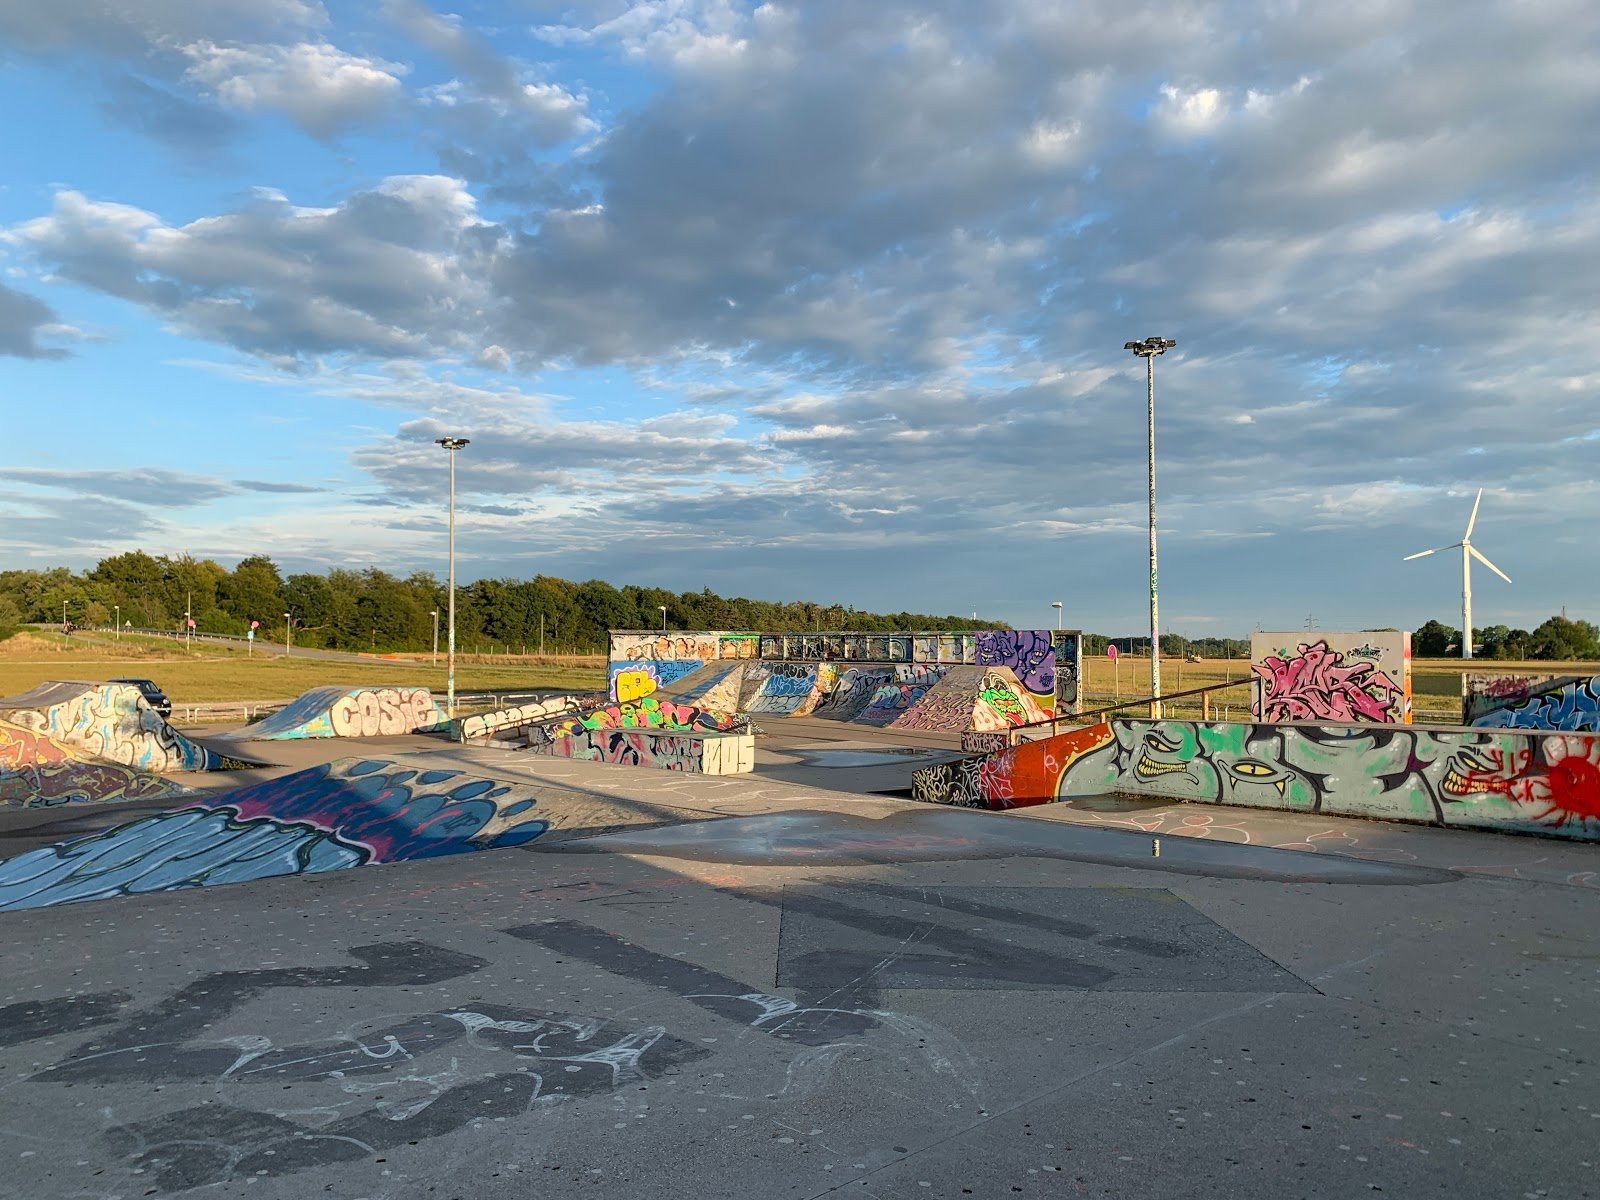 Darup Skatepark is situated on the moor close to Roskilde and it is a paradise for all skaters. The park has a large and satisfactory street course which combines spines, manual pads, ledges and rails in a unique way. Furthermore, a brand new bowl was built in 2012, replacing the old mini vert. The bowl is made of wood and steel and it is great for experienced skaters. As if this was not enough, Darup skatepark also has a large vert like the ones that are used for competitions with professional skaters. This means that whether you are a street skater, a vert skater or a bowl skater, there is something for you to enjoy in Darup. During the warm-up days at Roskilde Festival, Darup Skatepark is a popular haven for the skaters who participate in the festival. There are countless event for both skateboarders, rollerbladers and BMXers. In addition, there are usually many professional skaters from all over the world who participate in shows at this park during the Roskilde Festival. You do not want to miss this.